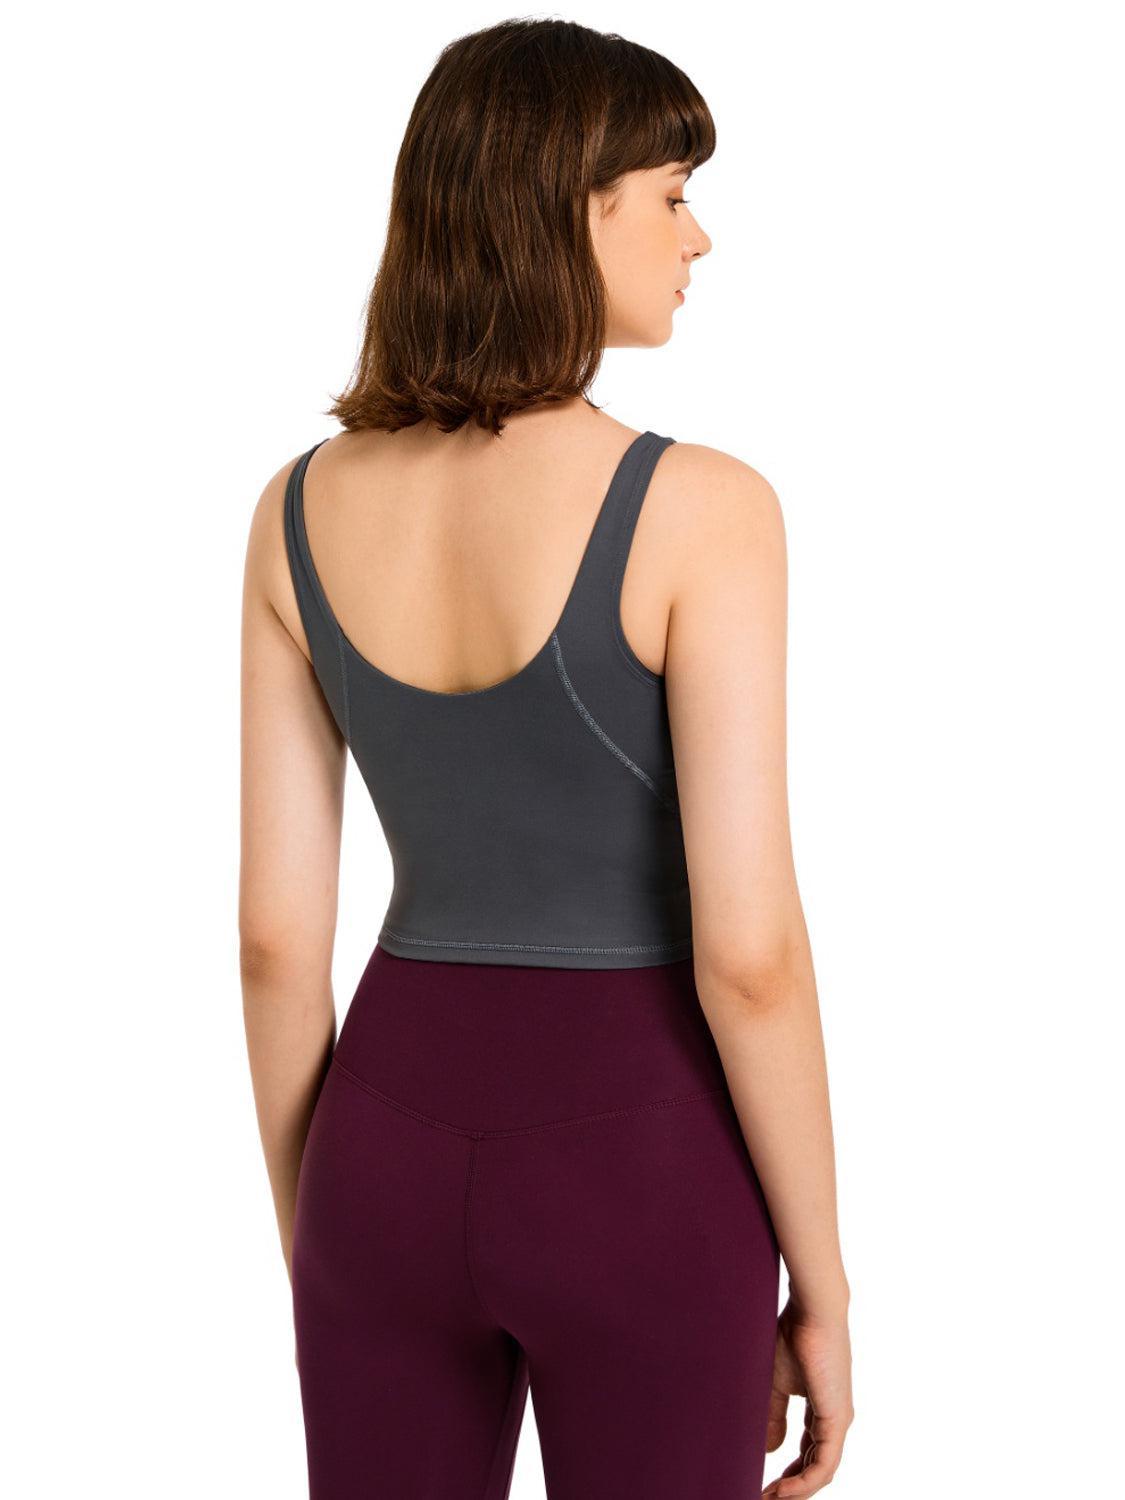 the back of a woman wearing a grey top and purple leggings